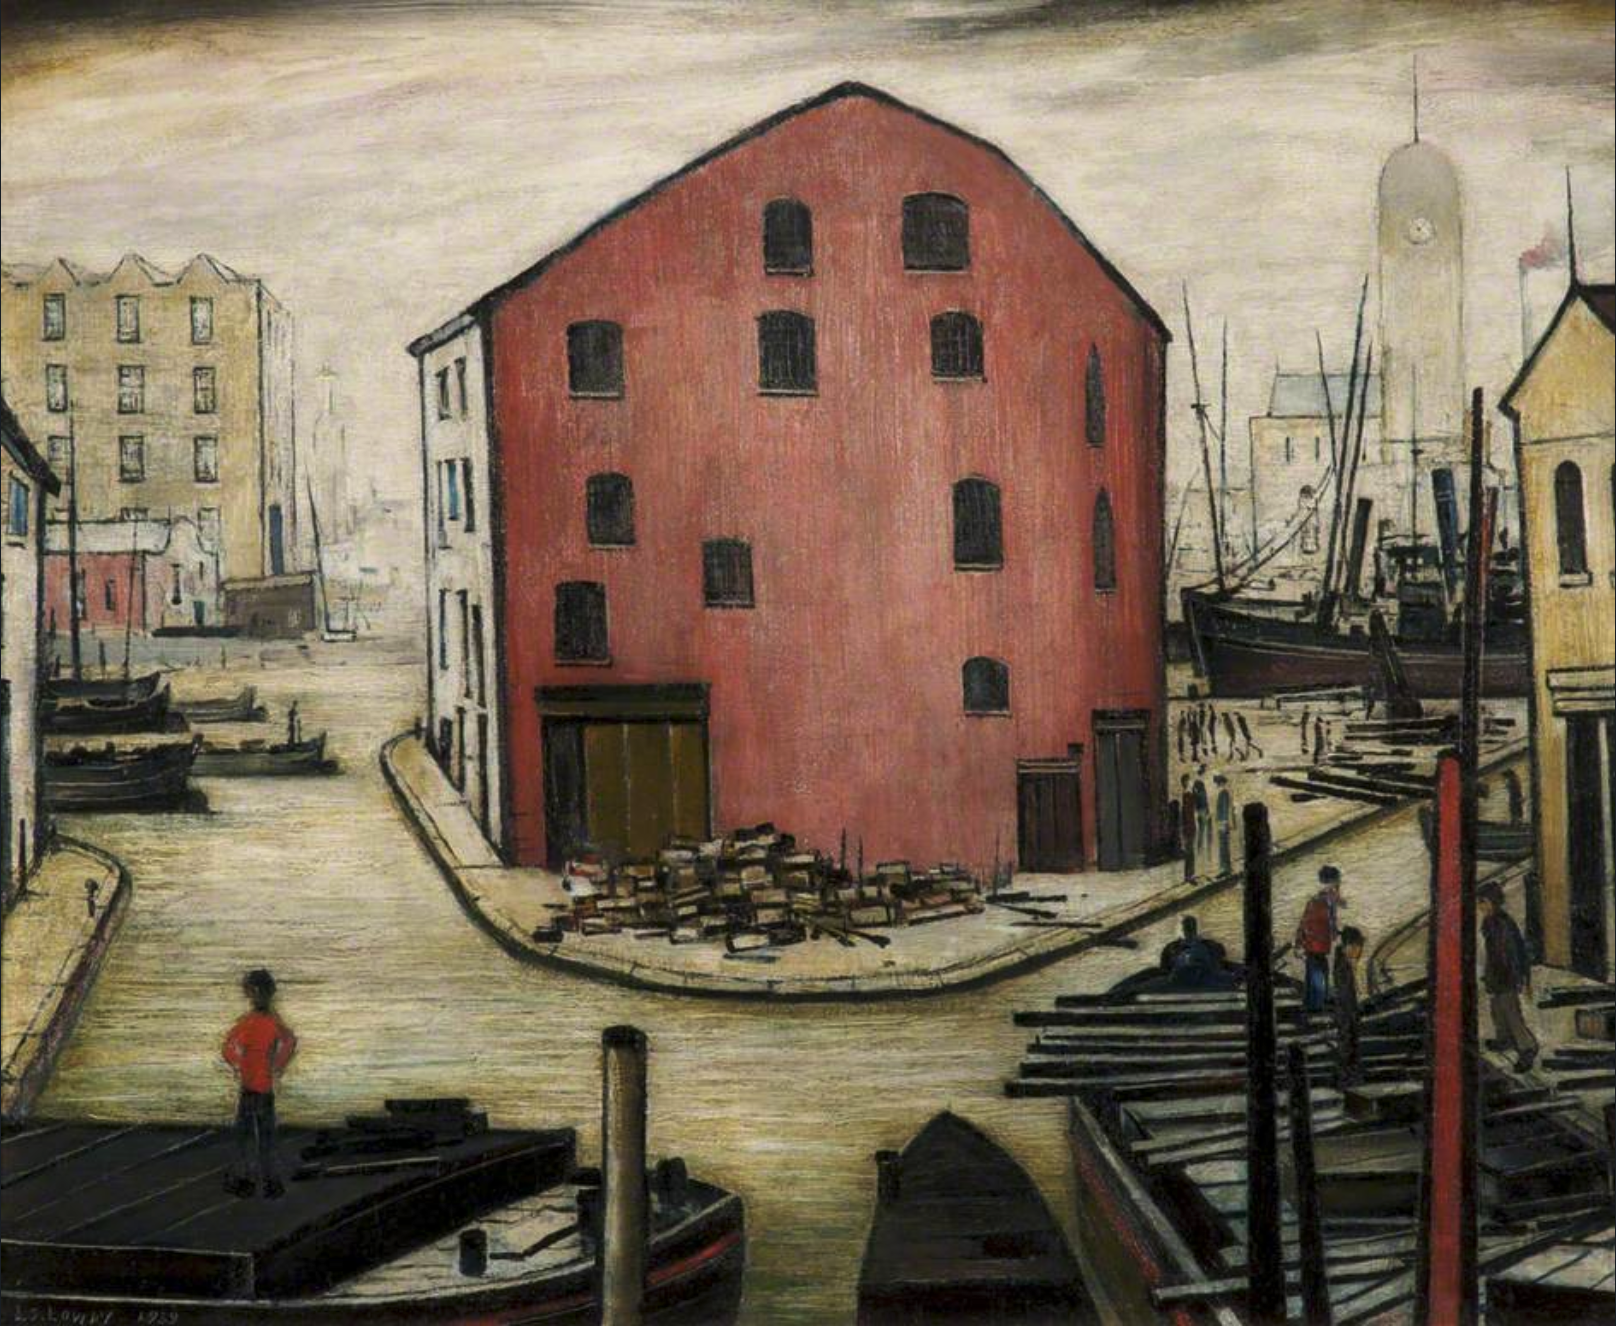 Canal Scene near Accrington (1939) by Laurence Stephen Lowry (1887 - 1976), English artist.